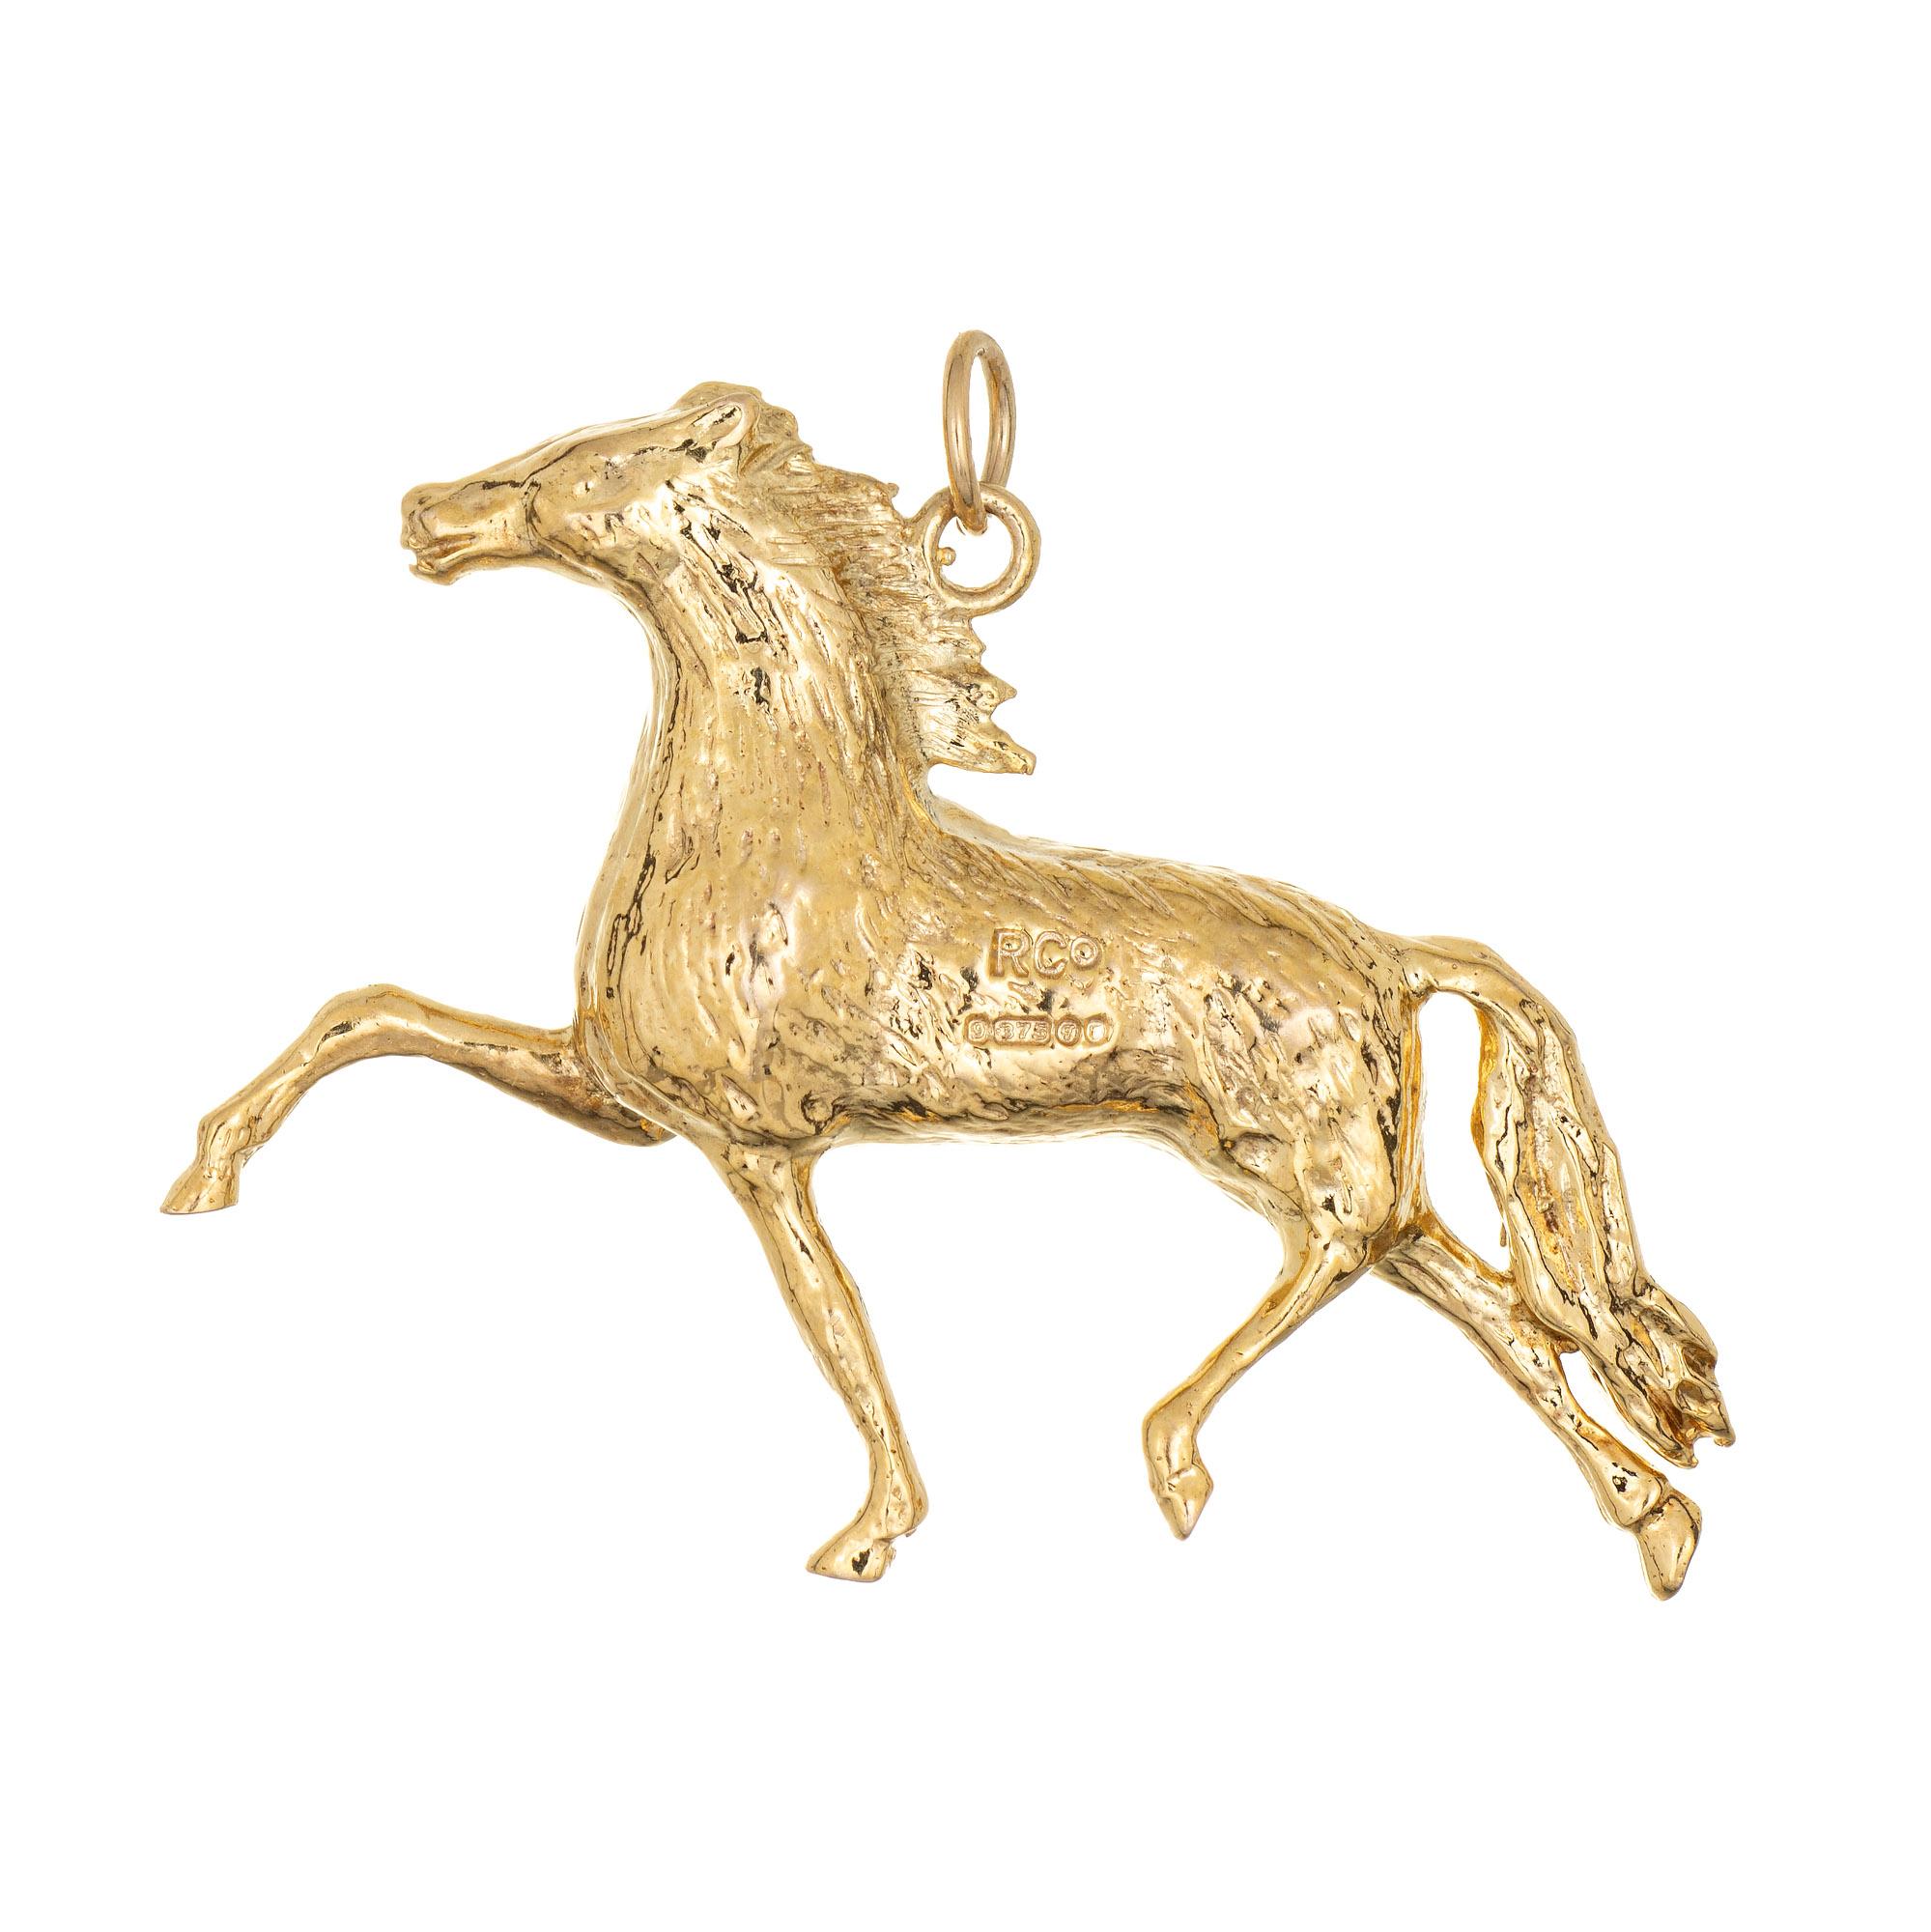 Finely detailed vintage Horse charm crafted in 9k yellow gold.  

The horse is rendered in lifelike detail, galloping with legs in motion. The piece can be worn as a charm on a bracelet or as a pendant.

The charm is in very good condition and was